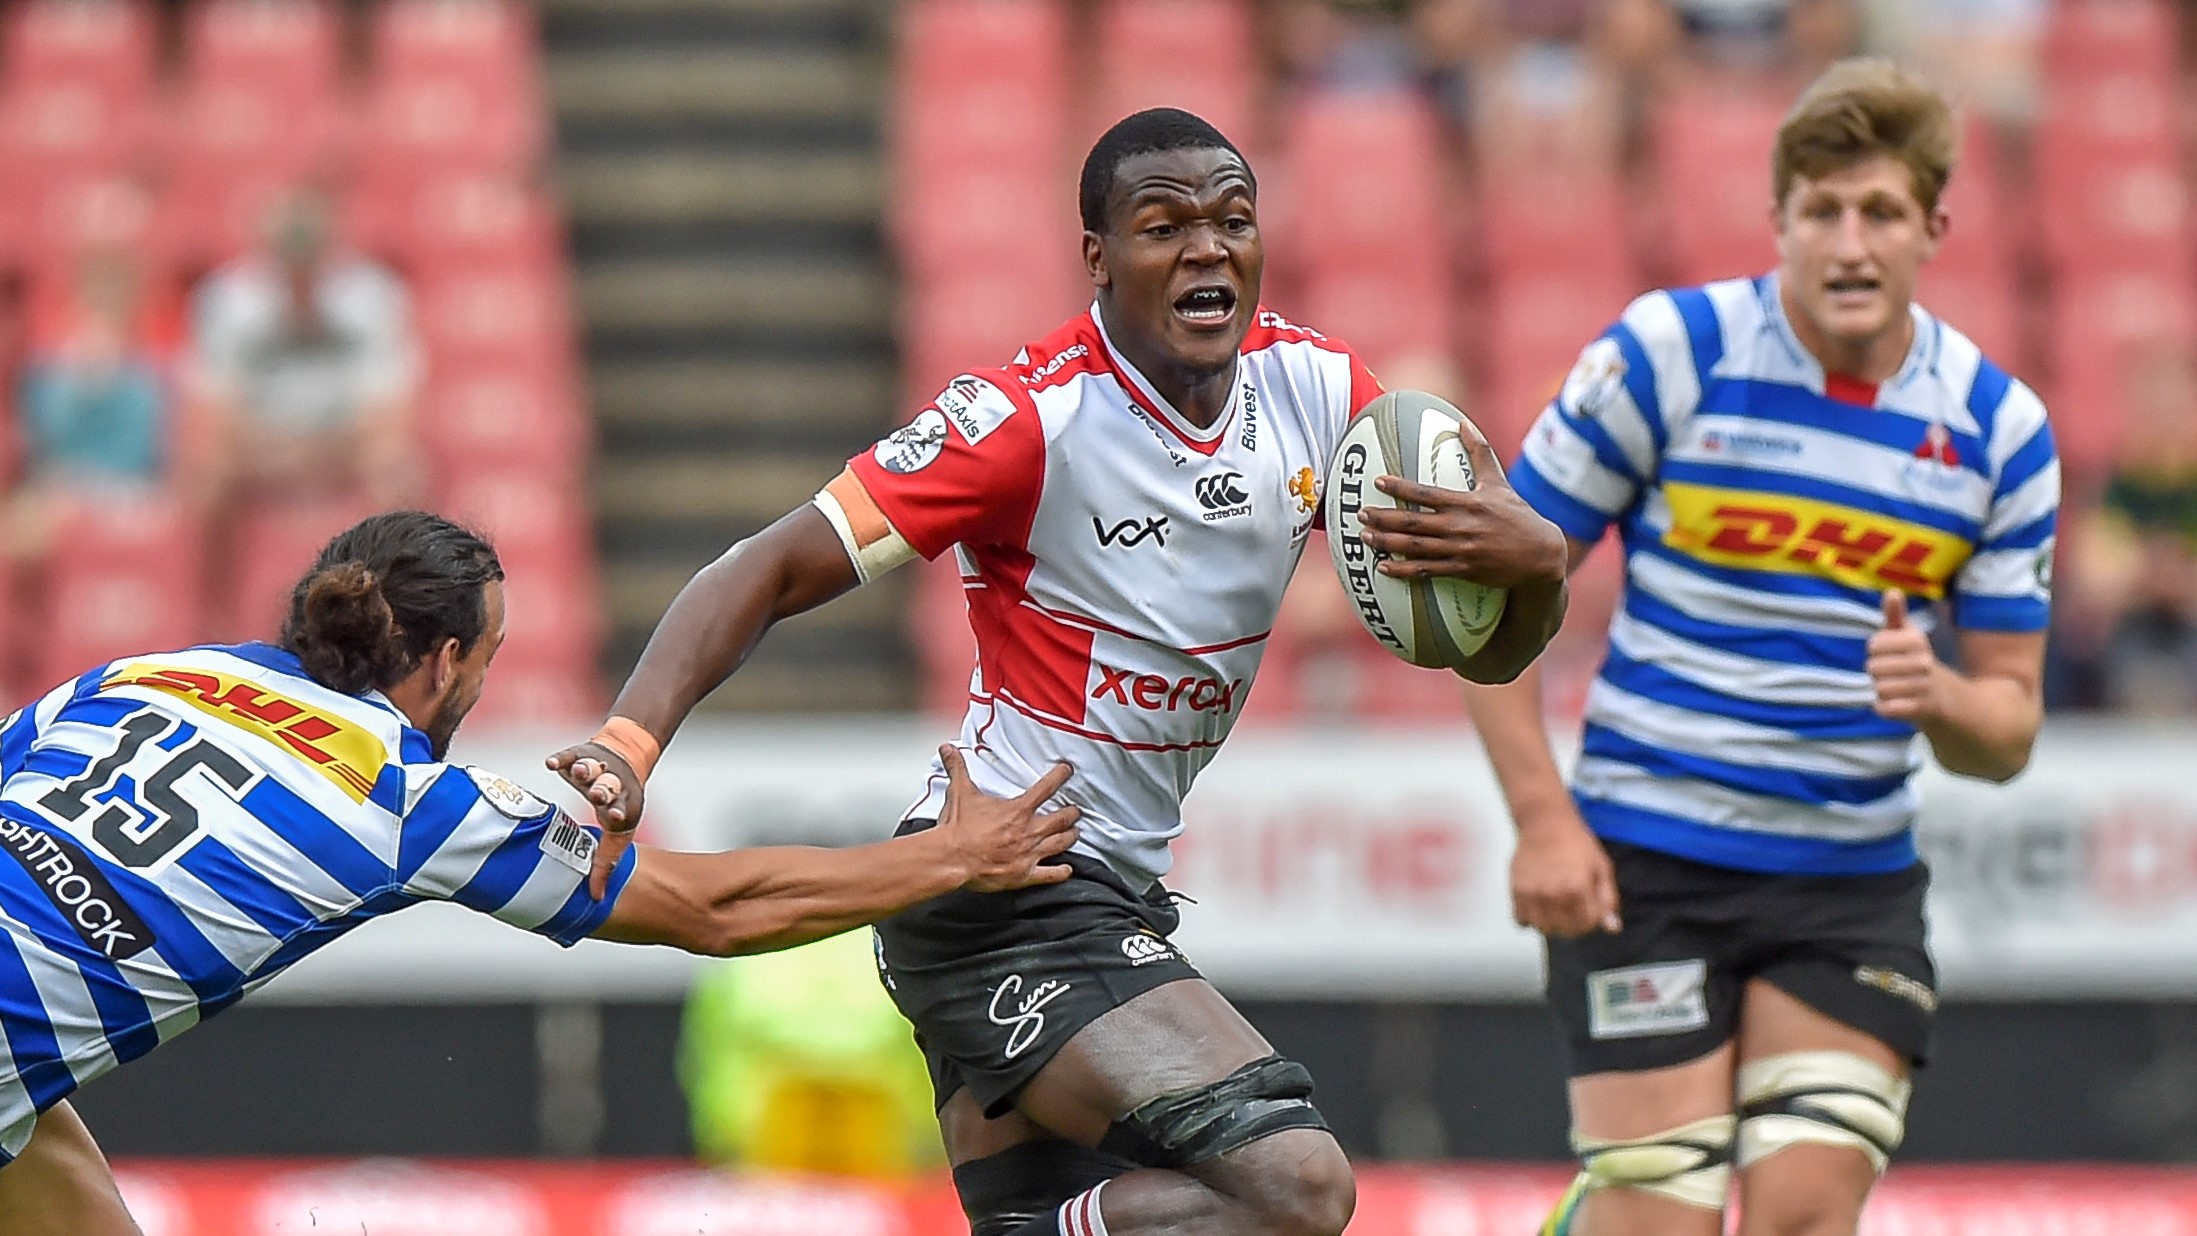 Dillyn Leyds of the DHL WP tackles Hacjivah Dayimani of the Xerox Golden Lions during the Currie Cup Rugby match between the Xerox Golden Lions and DHL Western Province on September 15, 2018 at Emirates Airline Park in Johannesburg, South Africa. @Christiaan Kotze/BackpagePix